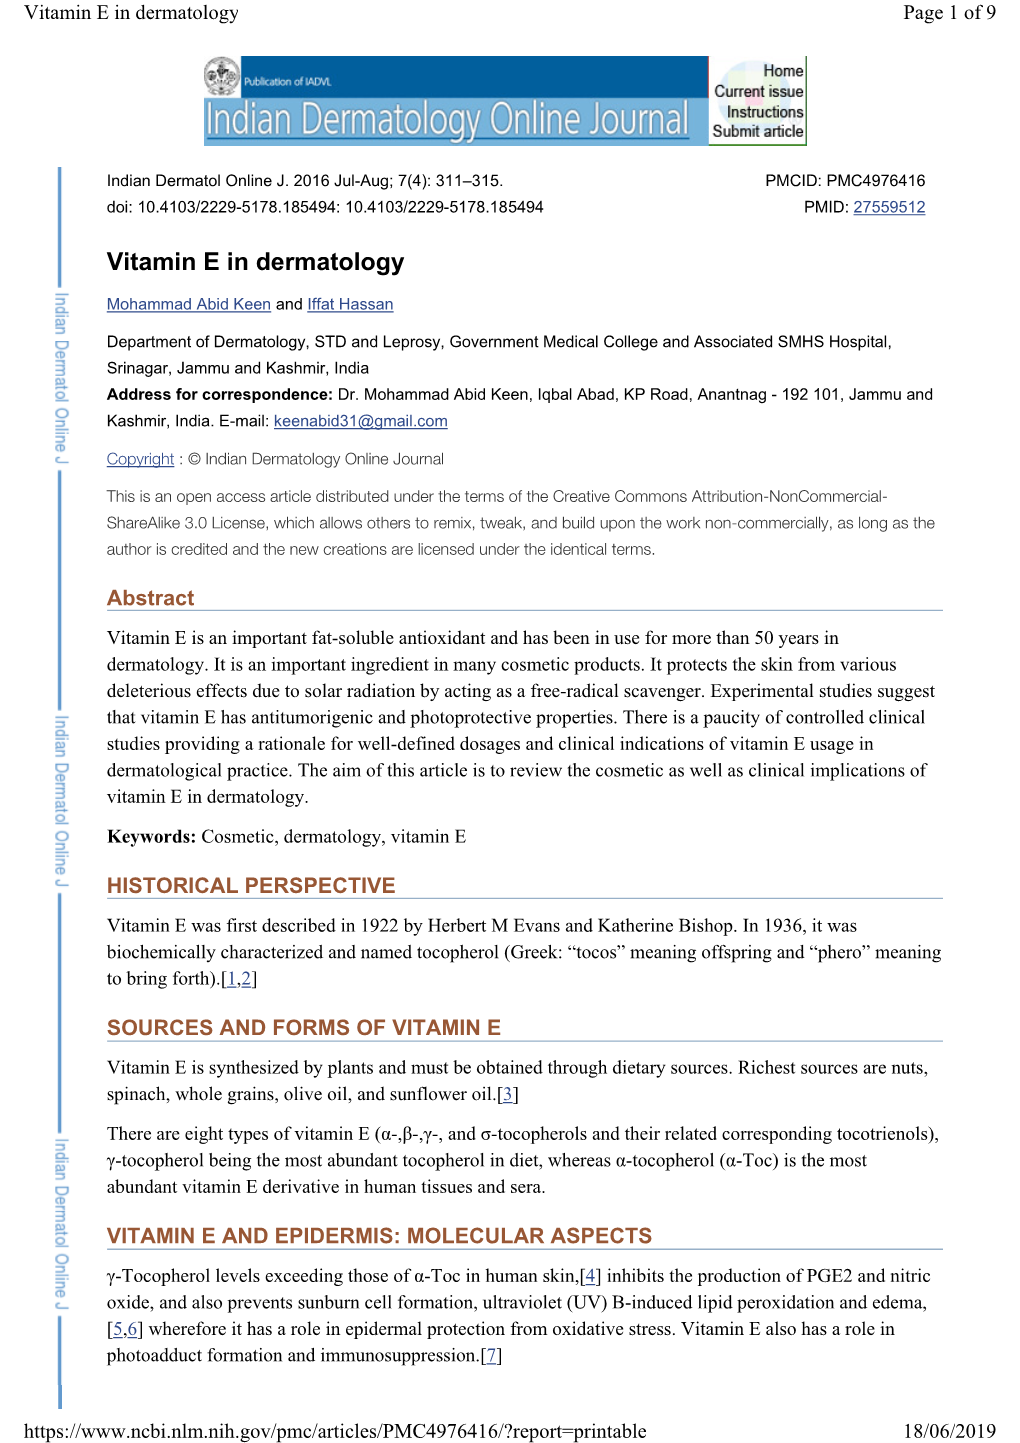 Vitamin E in Dermatology Page 1 of 9